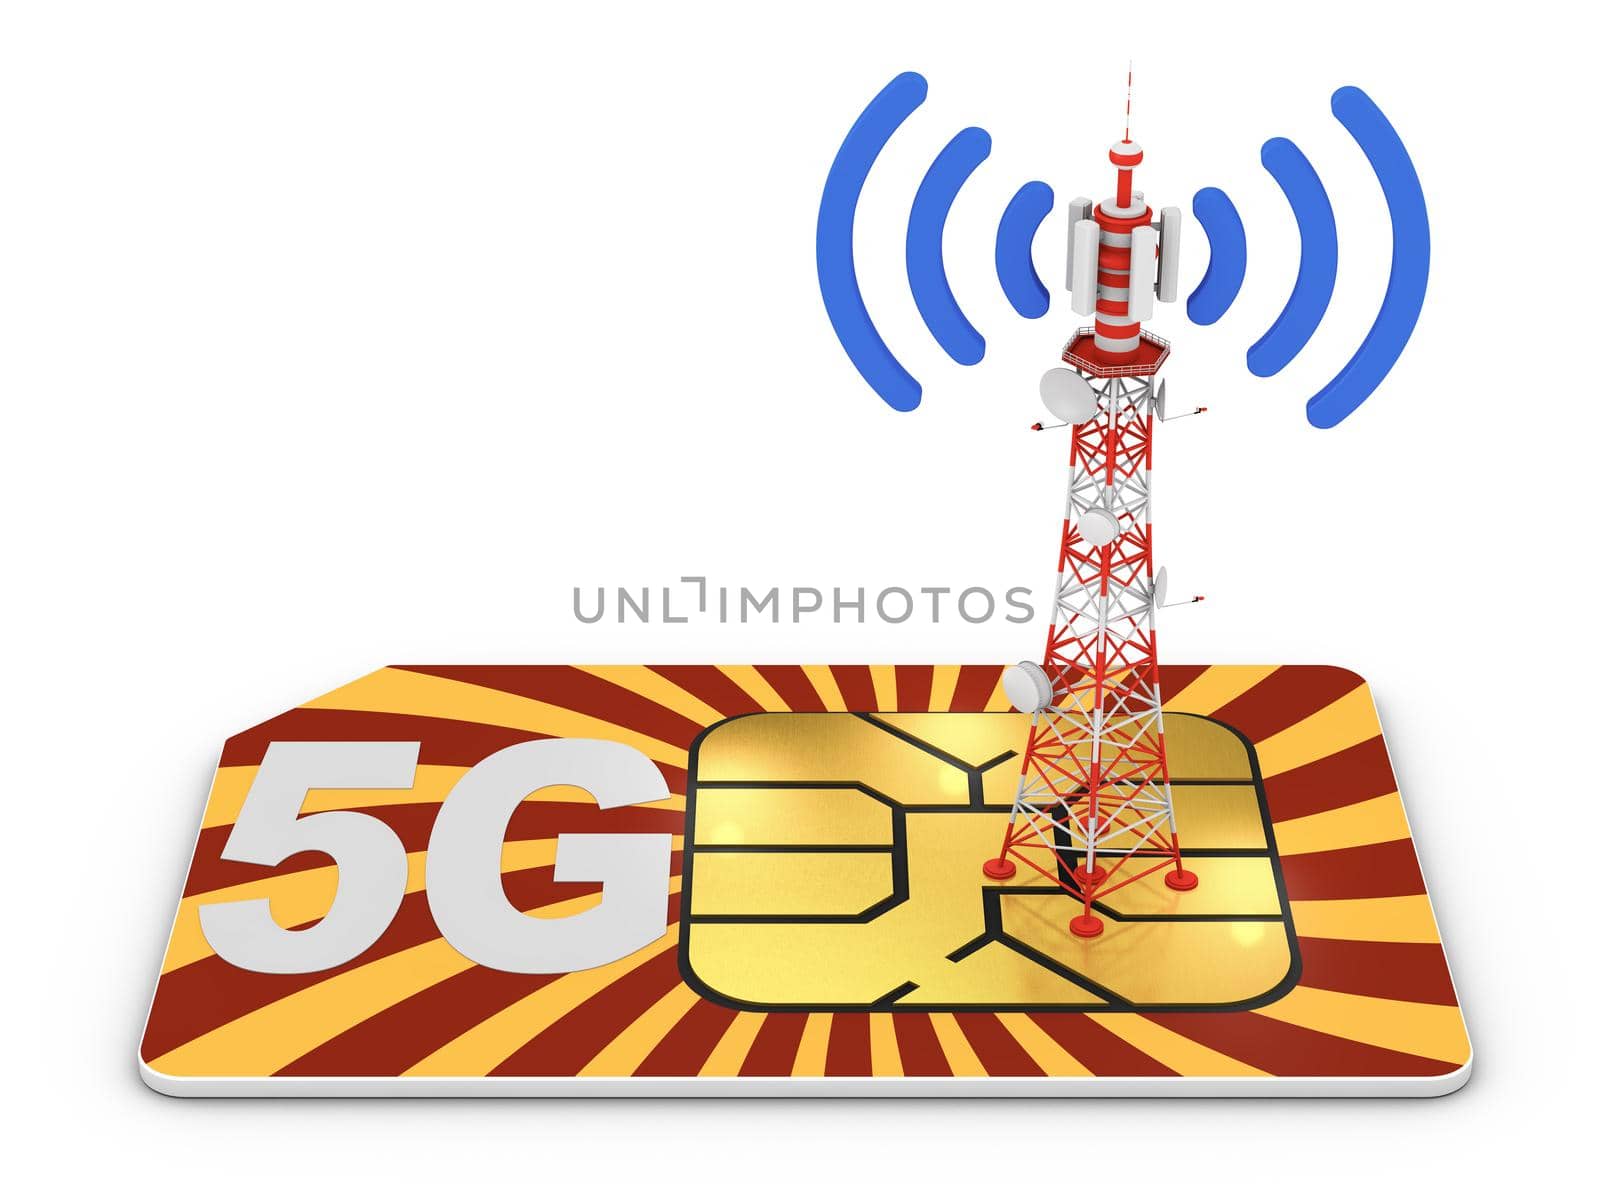 Sim card and telecommunication tower by rommma